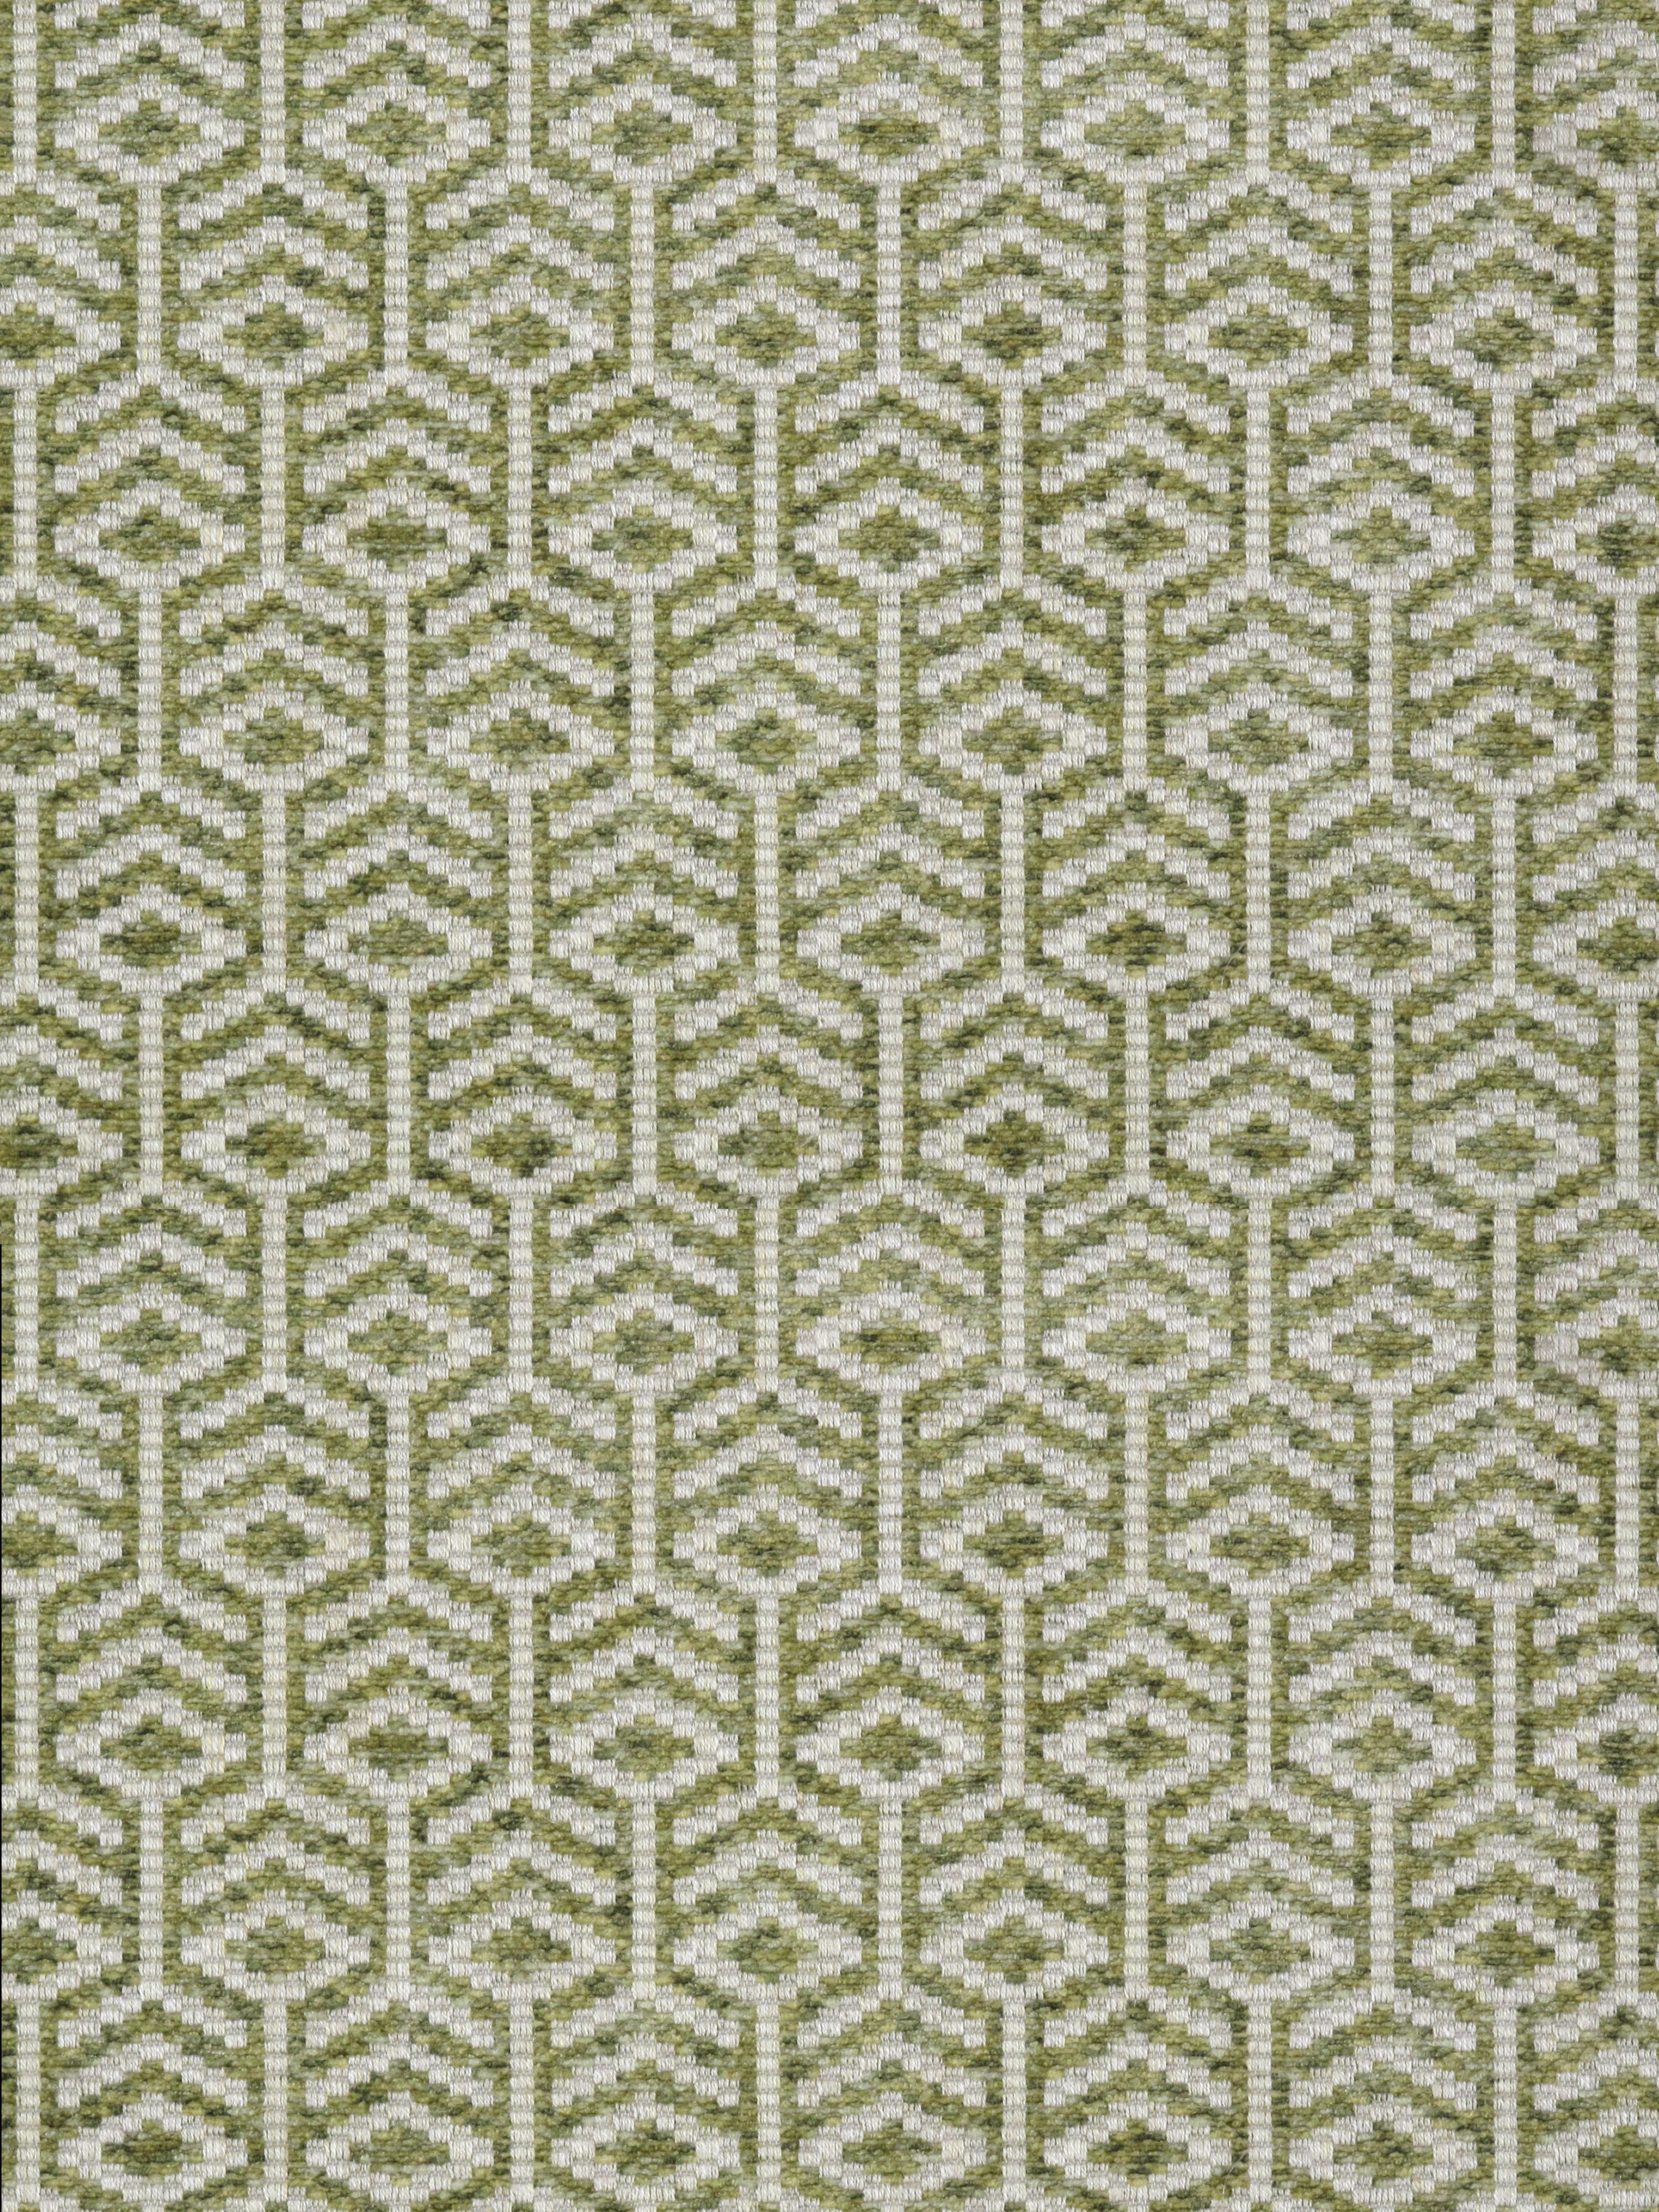 Axial fabric in spring green color - pattern number FO 00051417 - by Scalamandre in the Old World Weavers collection